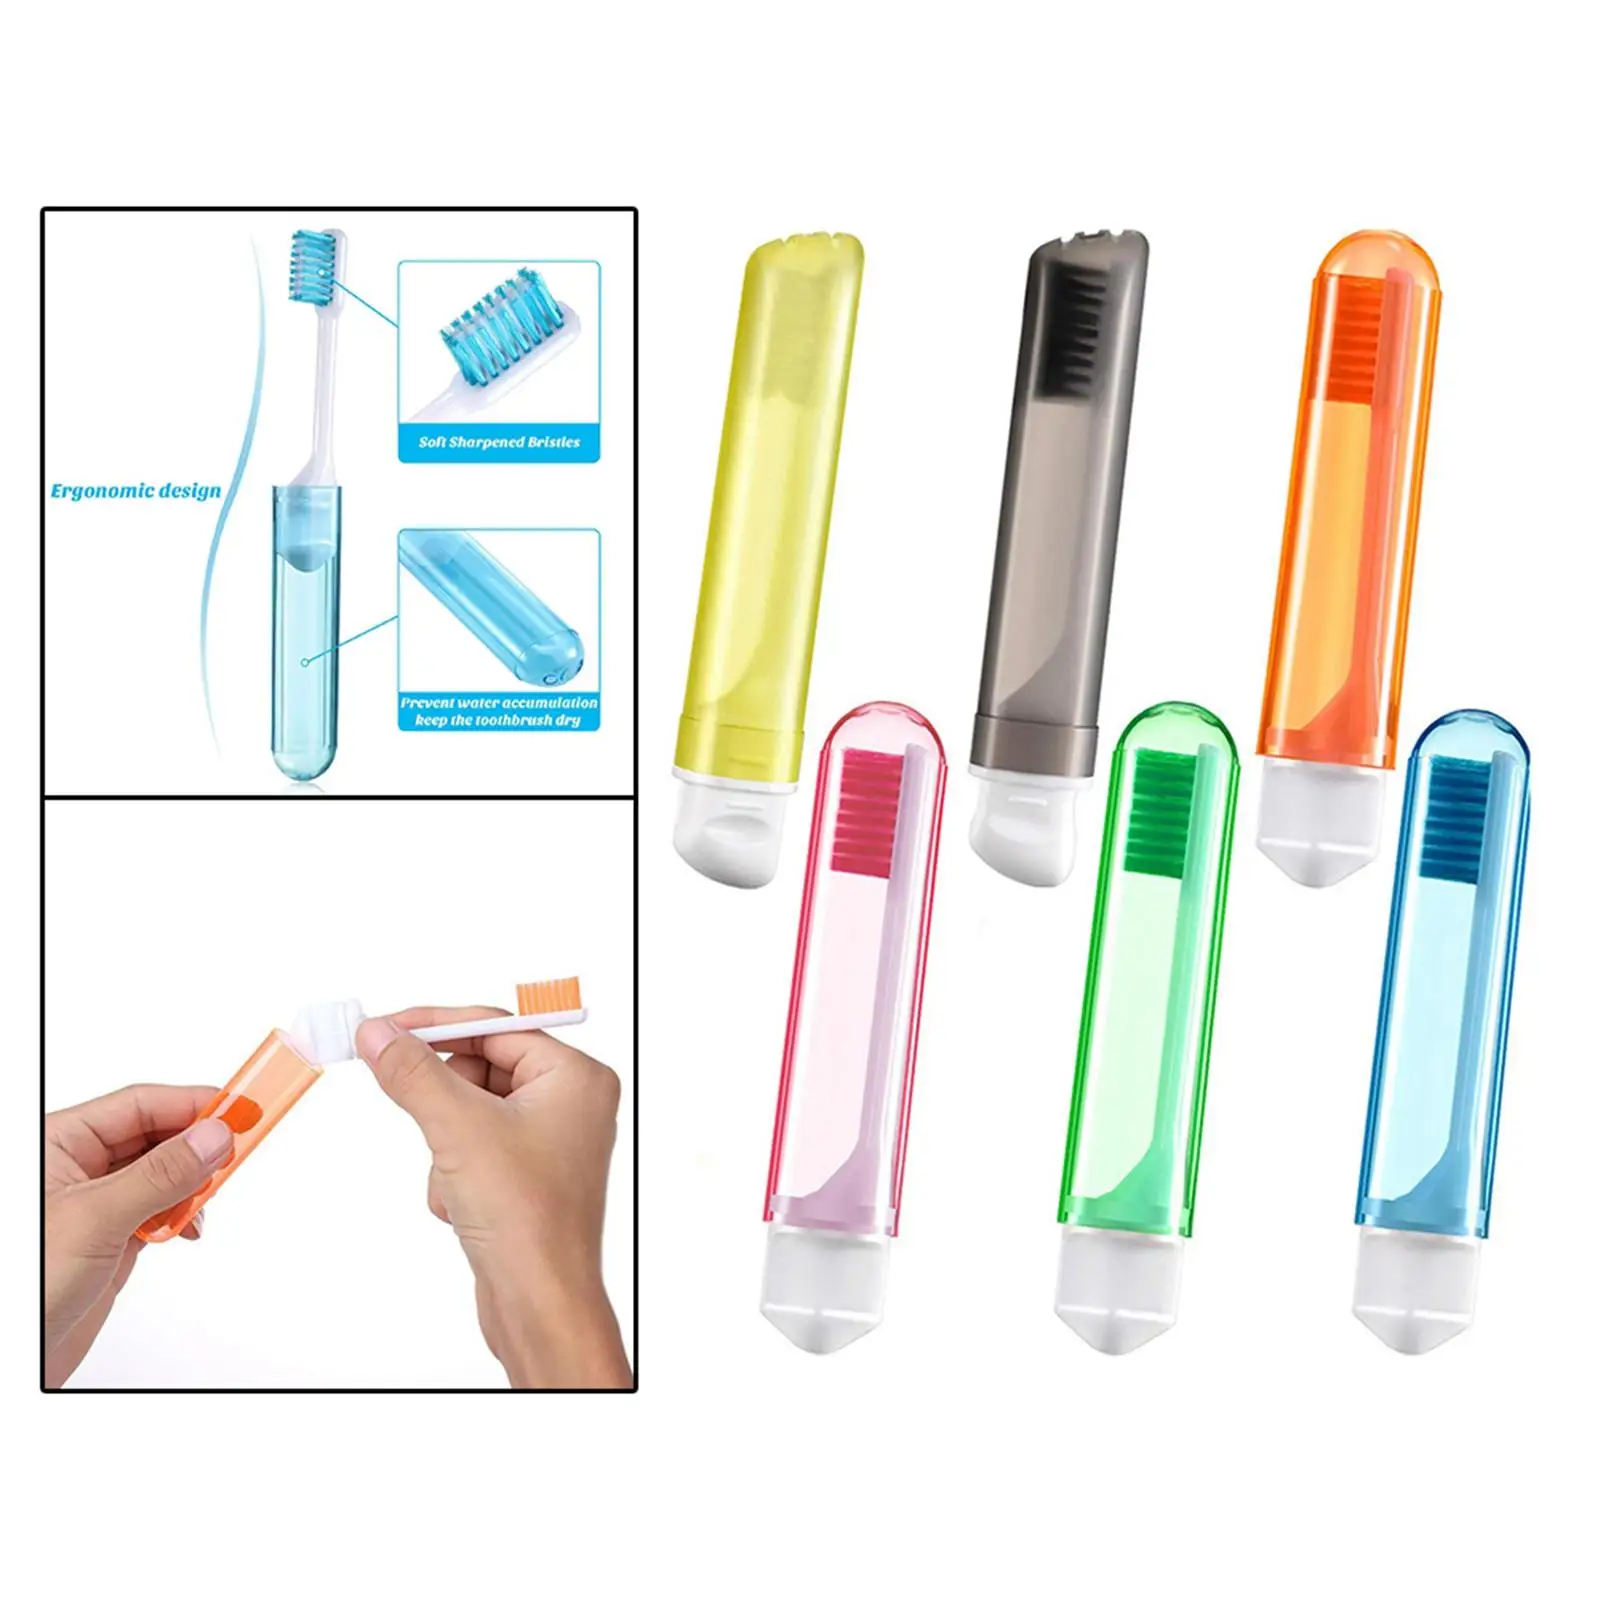 Portable Folding Toothbrush Lightweight Soft Bristle Manual Toothbrush Travel Size Travelling Toothbrush for Camping Hiking Trip